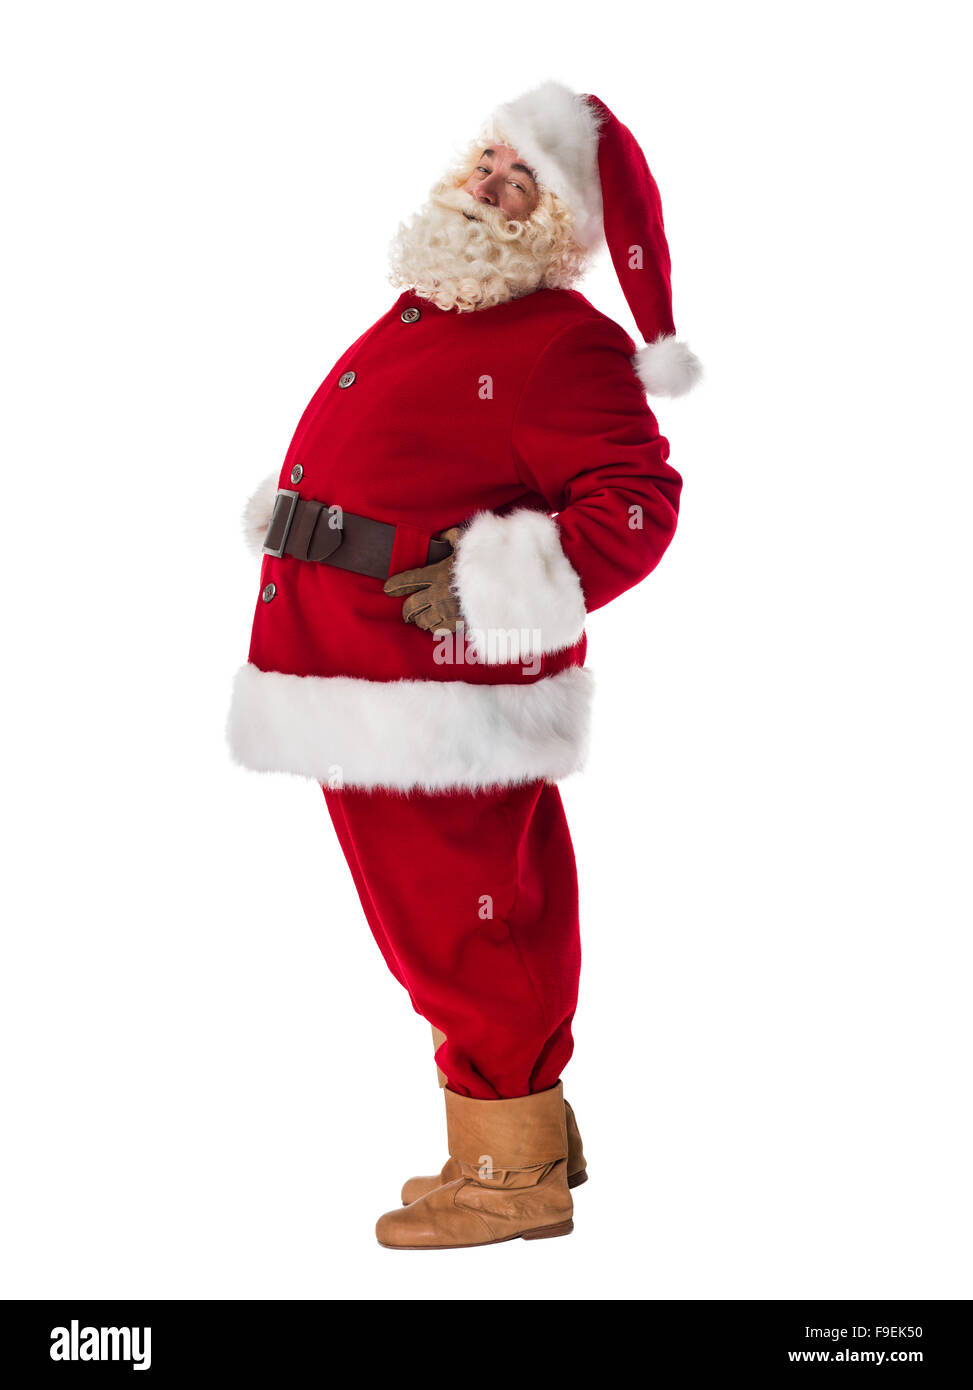 Santa Claus Portrait. Standing still and posing. Side view Stock Photo